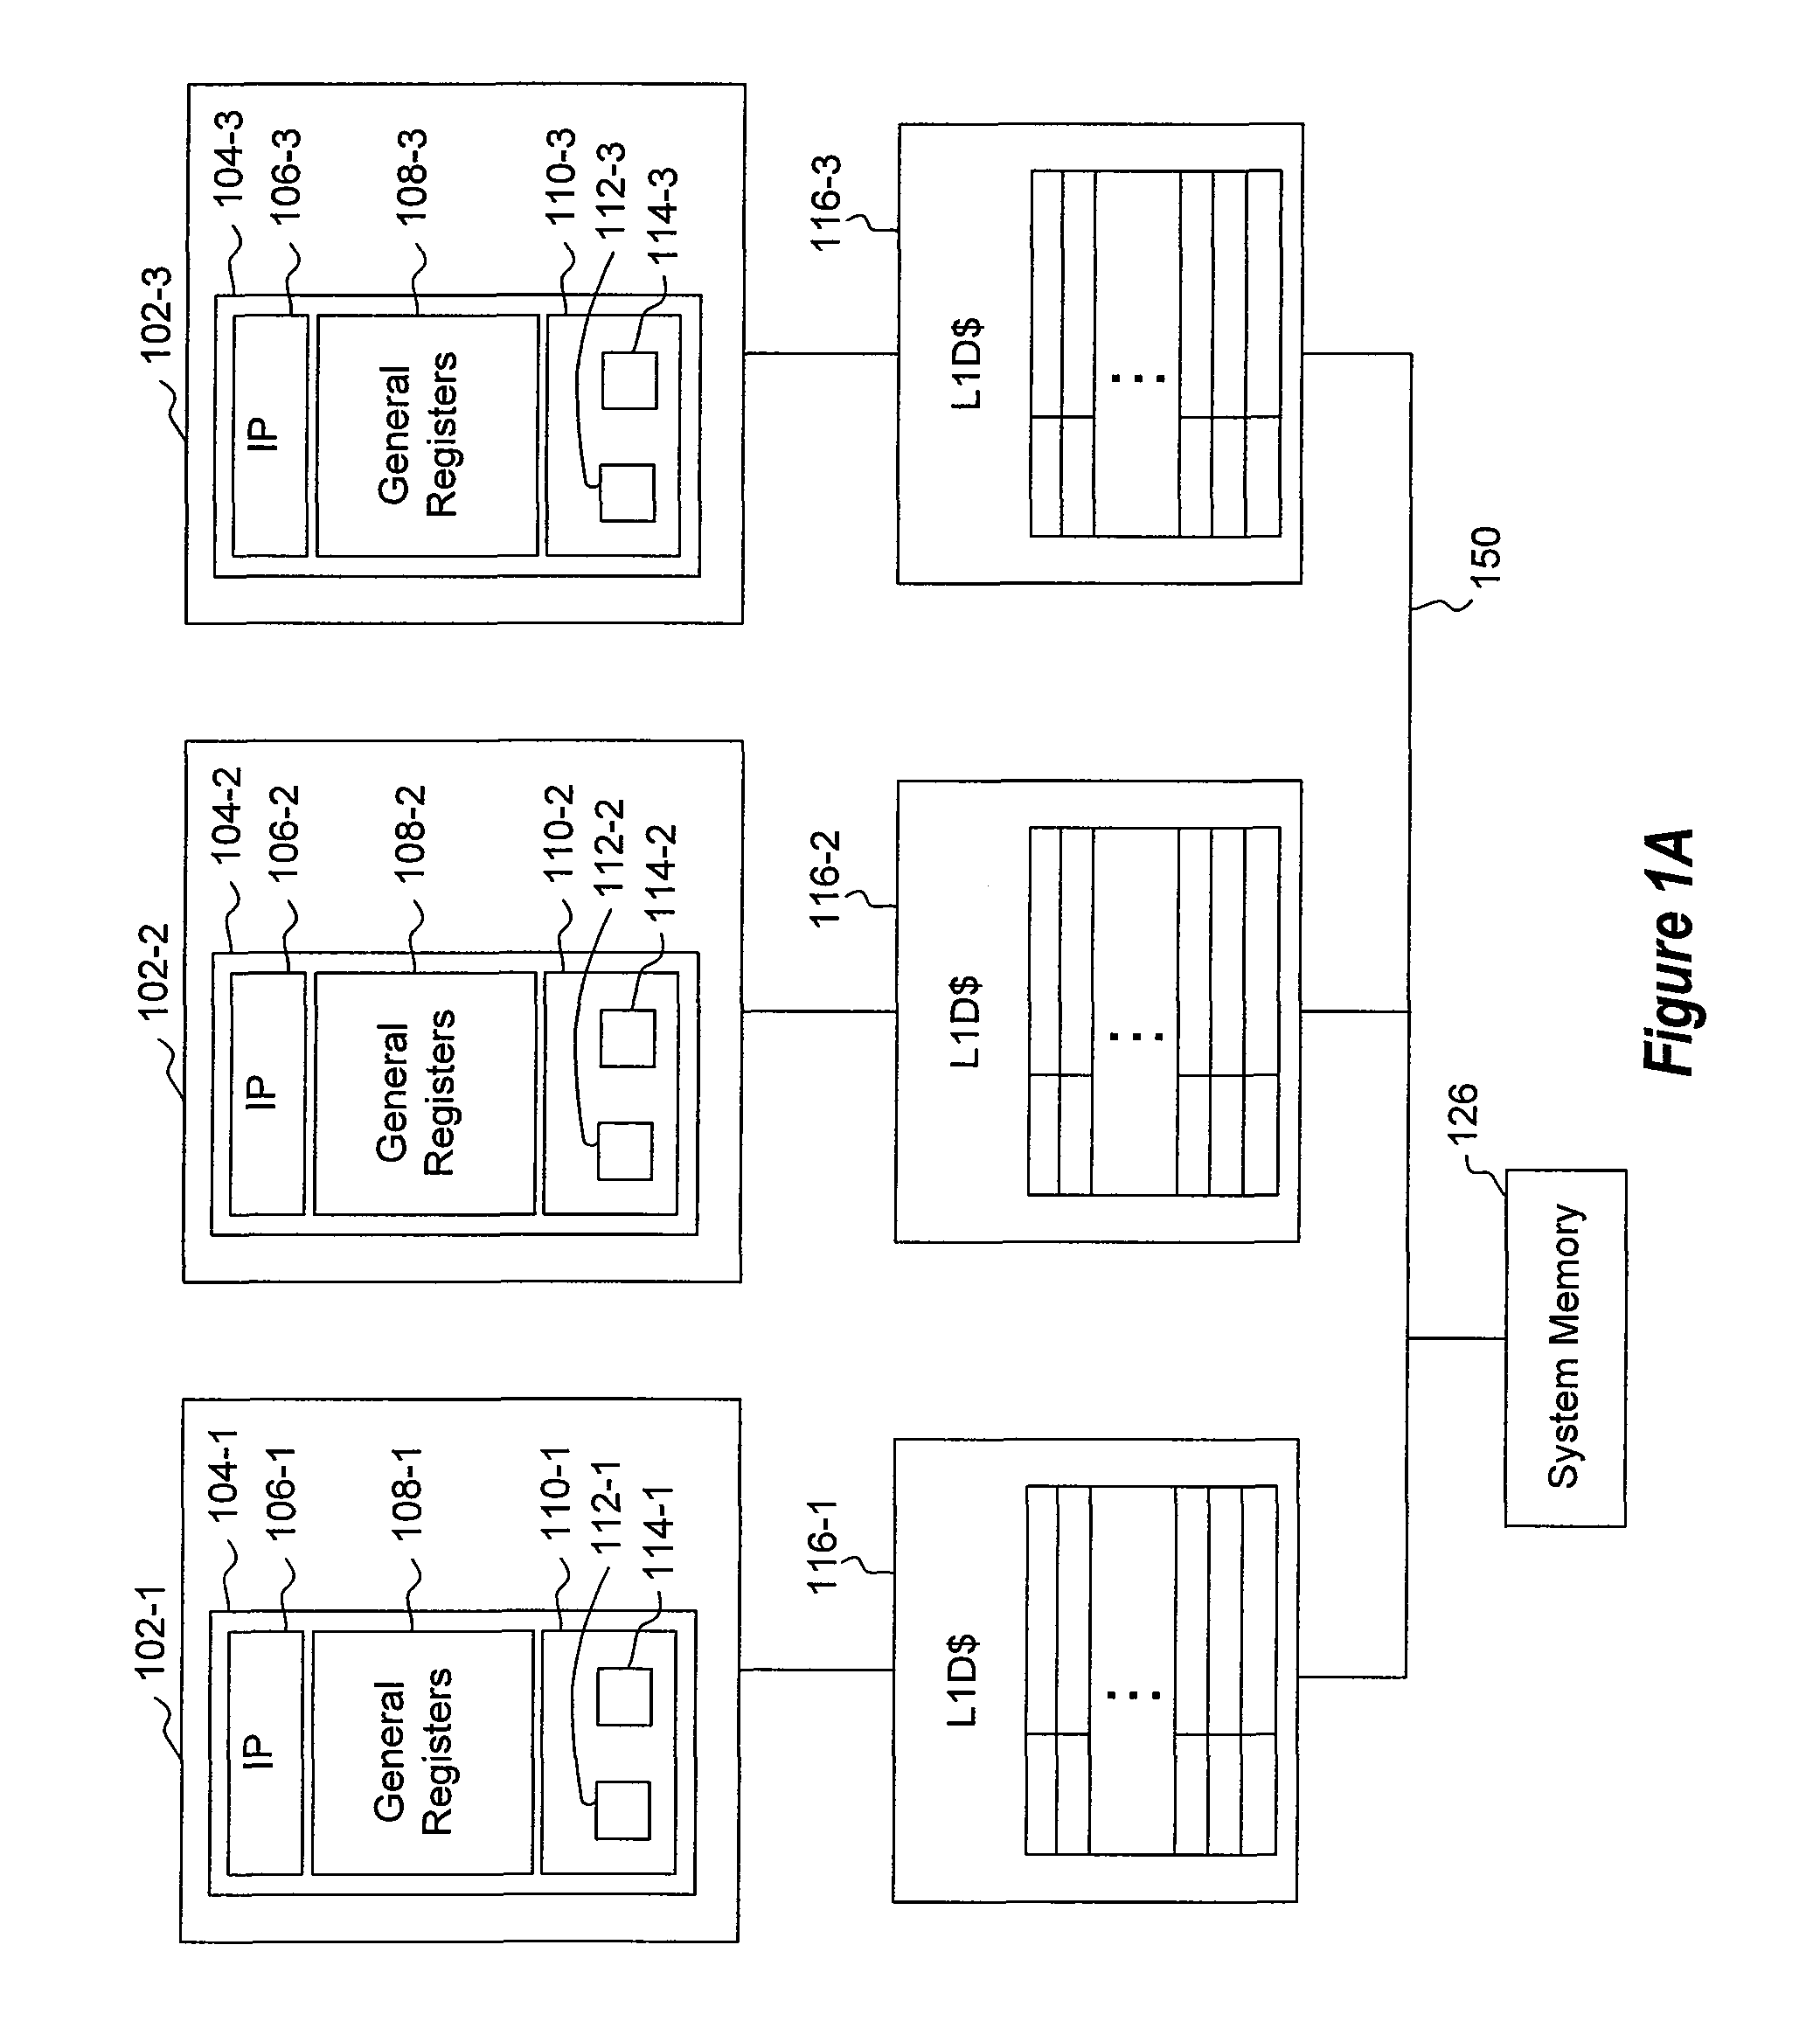 Efficient garbage collection and exception handling in a hardware accelerated transactional memory system